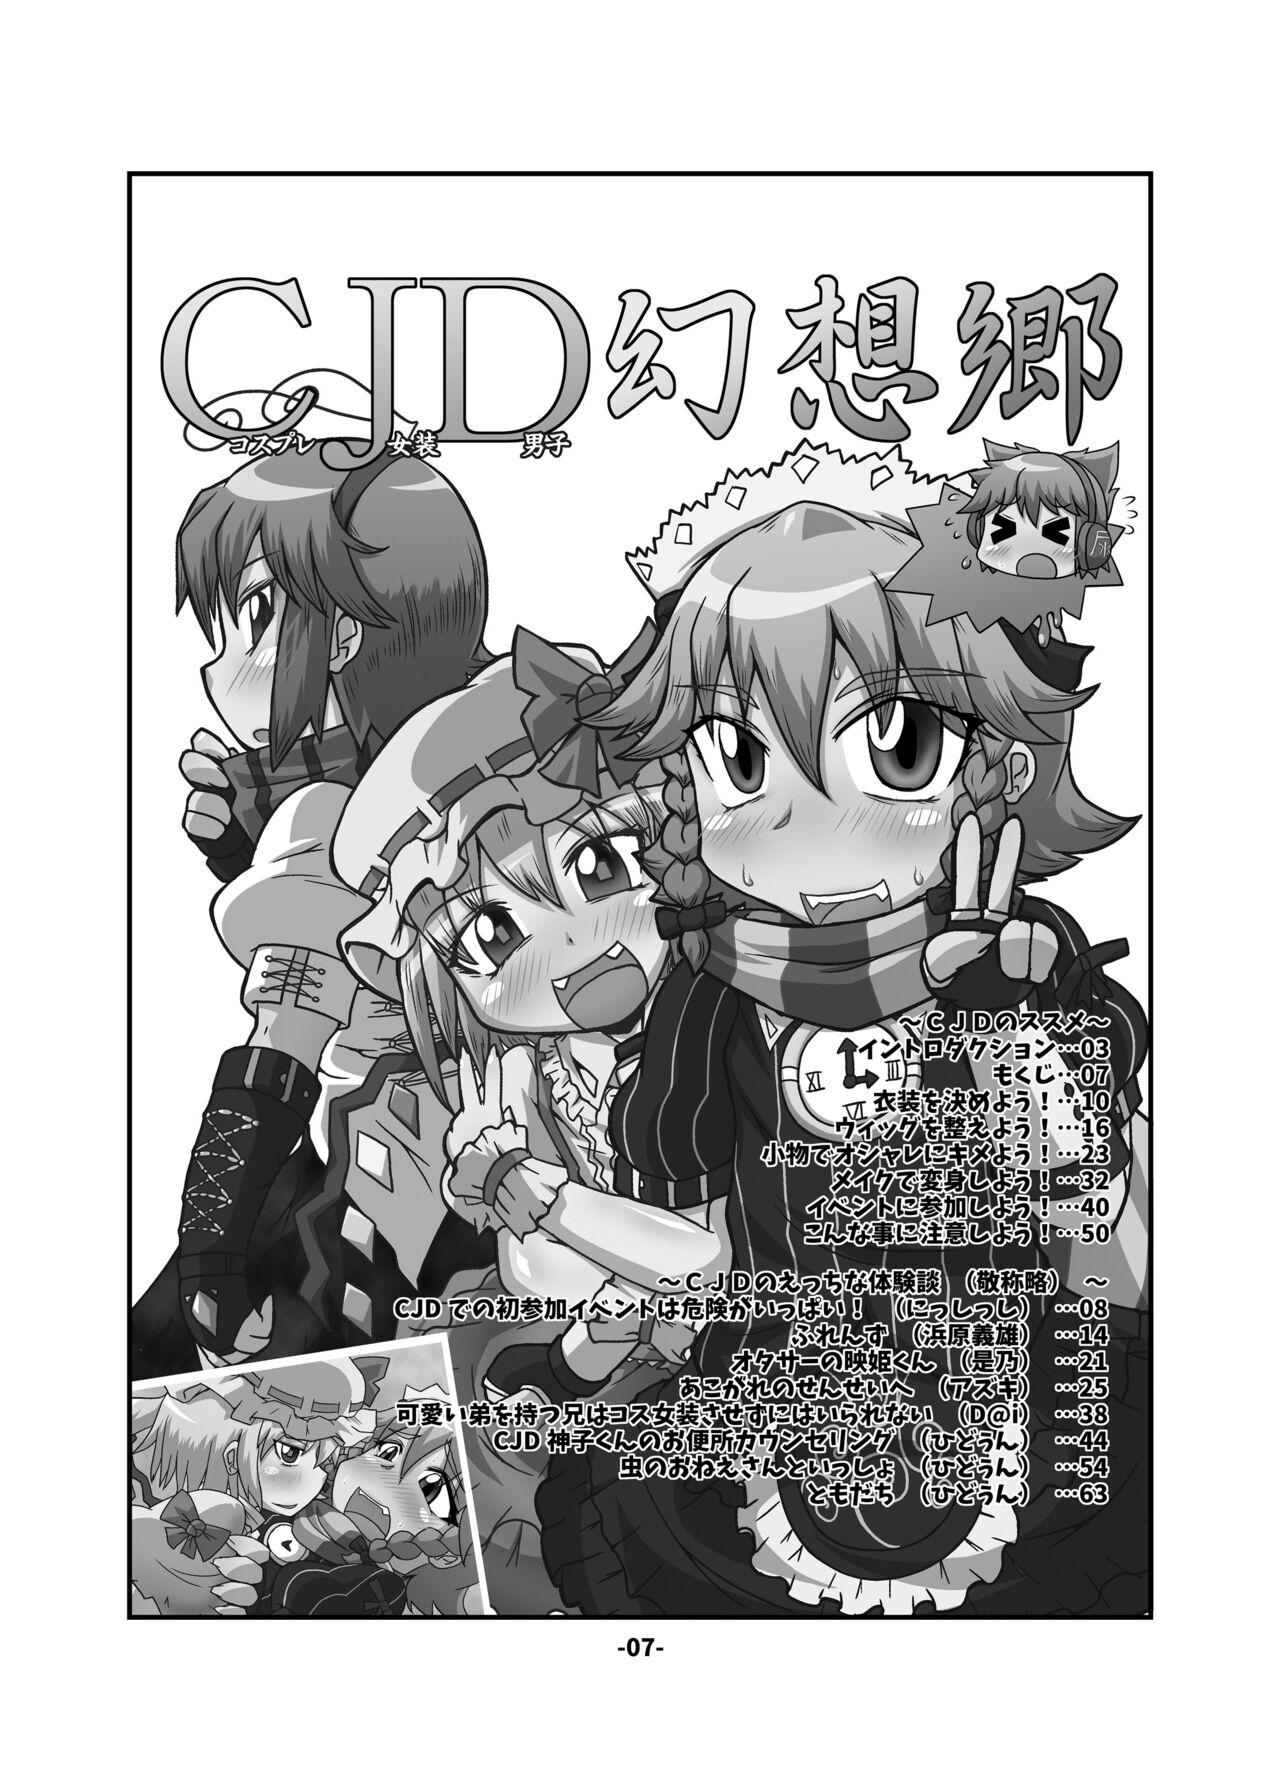 Cumload CJD Gensoukyou - Touhou project Brother - Page 7